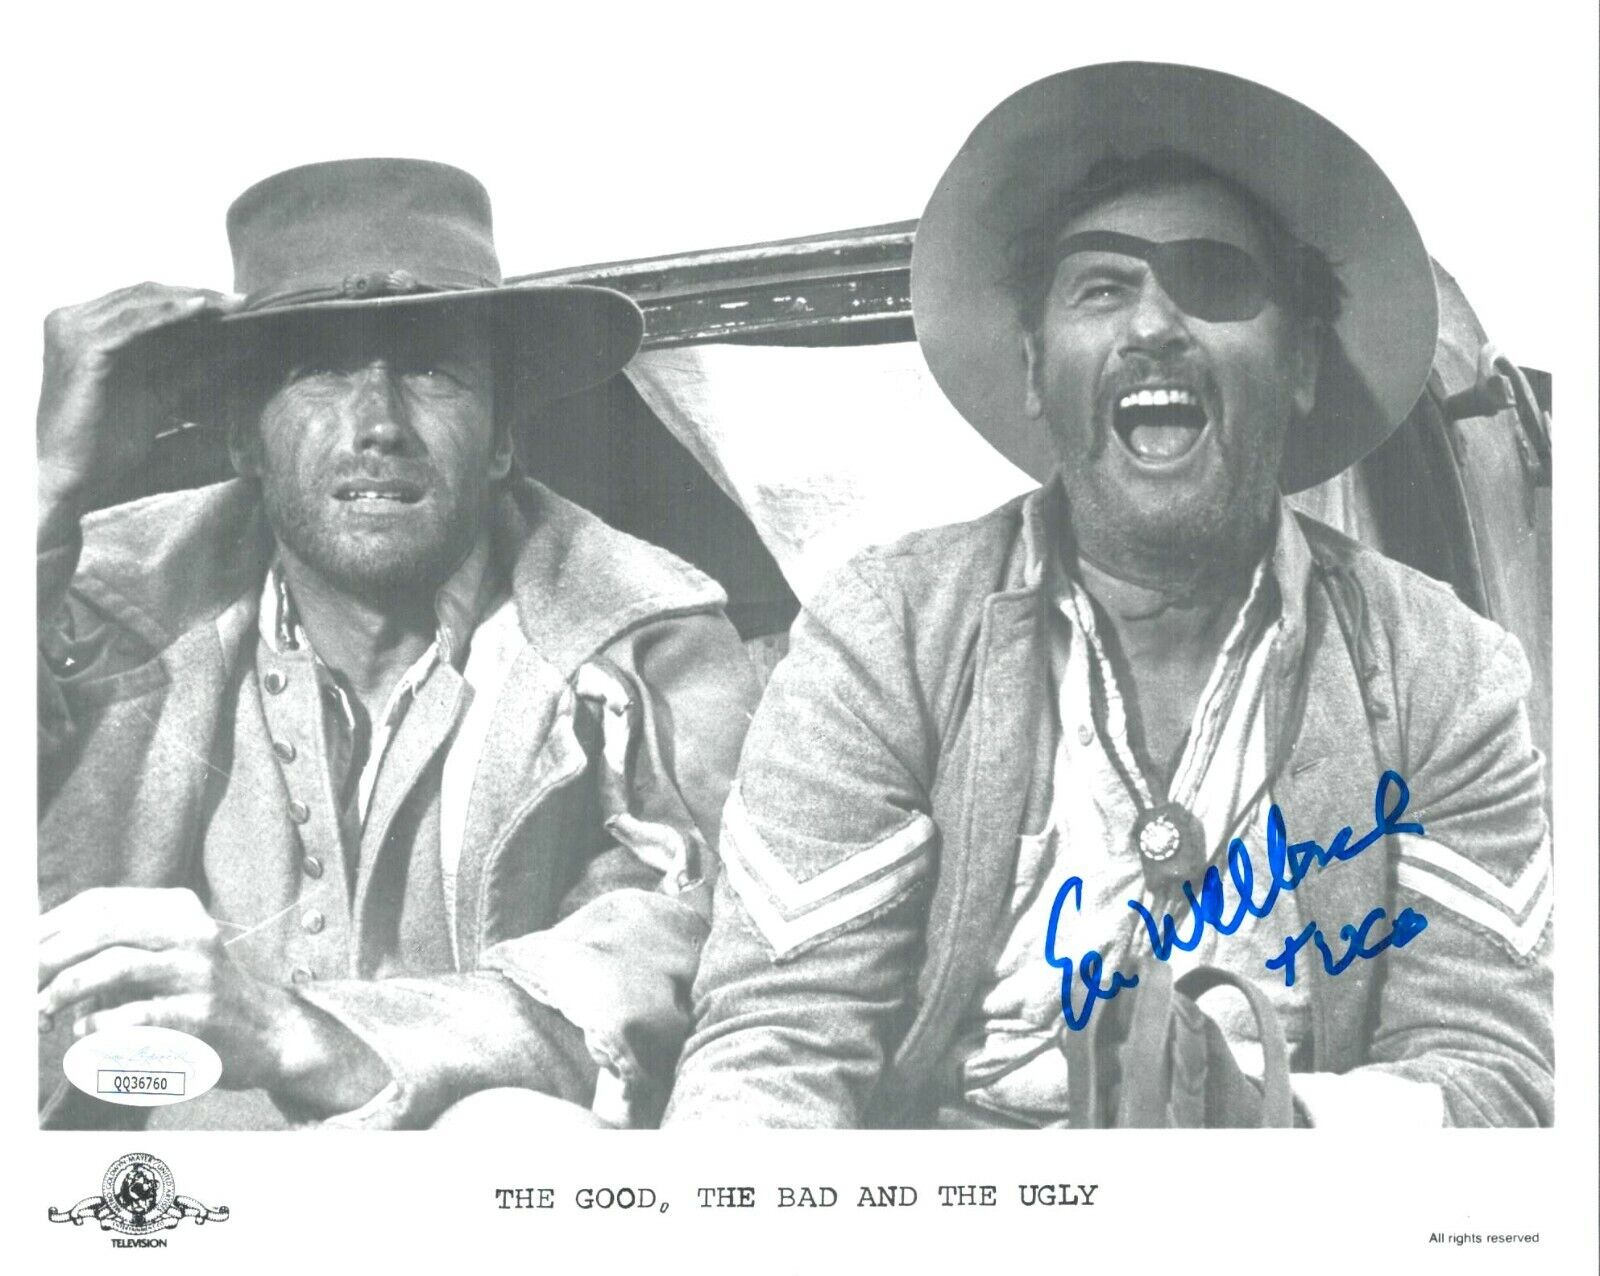 ELI WALLACH Signed GOOD BAD AND UGLY 8x10 Photo Poster painting Autograph JSA COA Cert